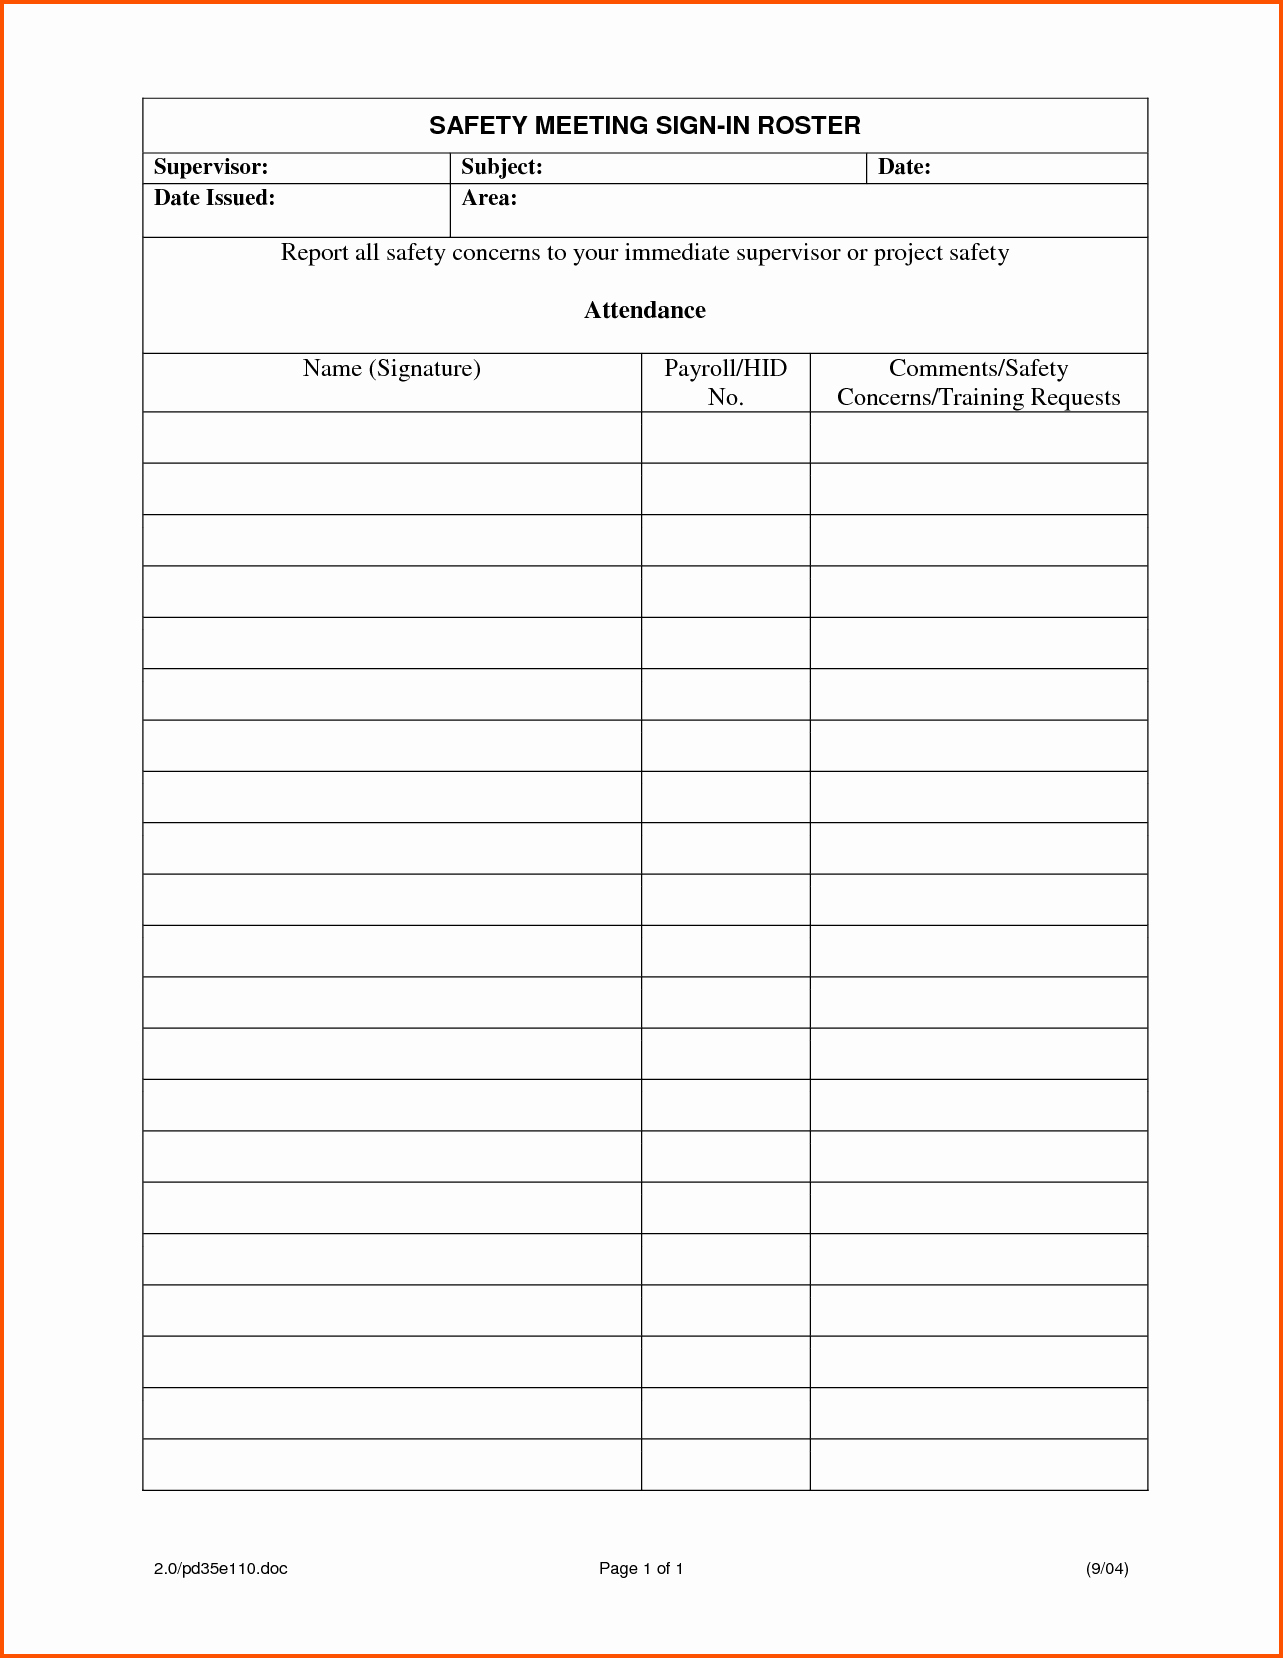 Conference Sign In Sheet Template Fresh 8 Meeting Sign In Sheet Template Awesome Collection